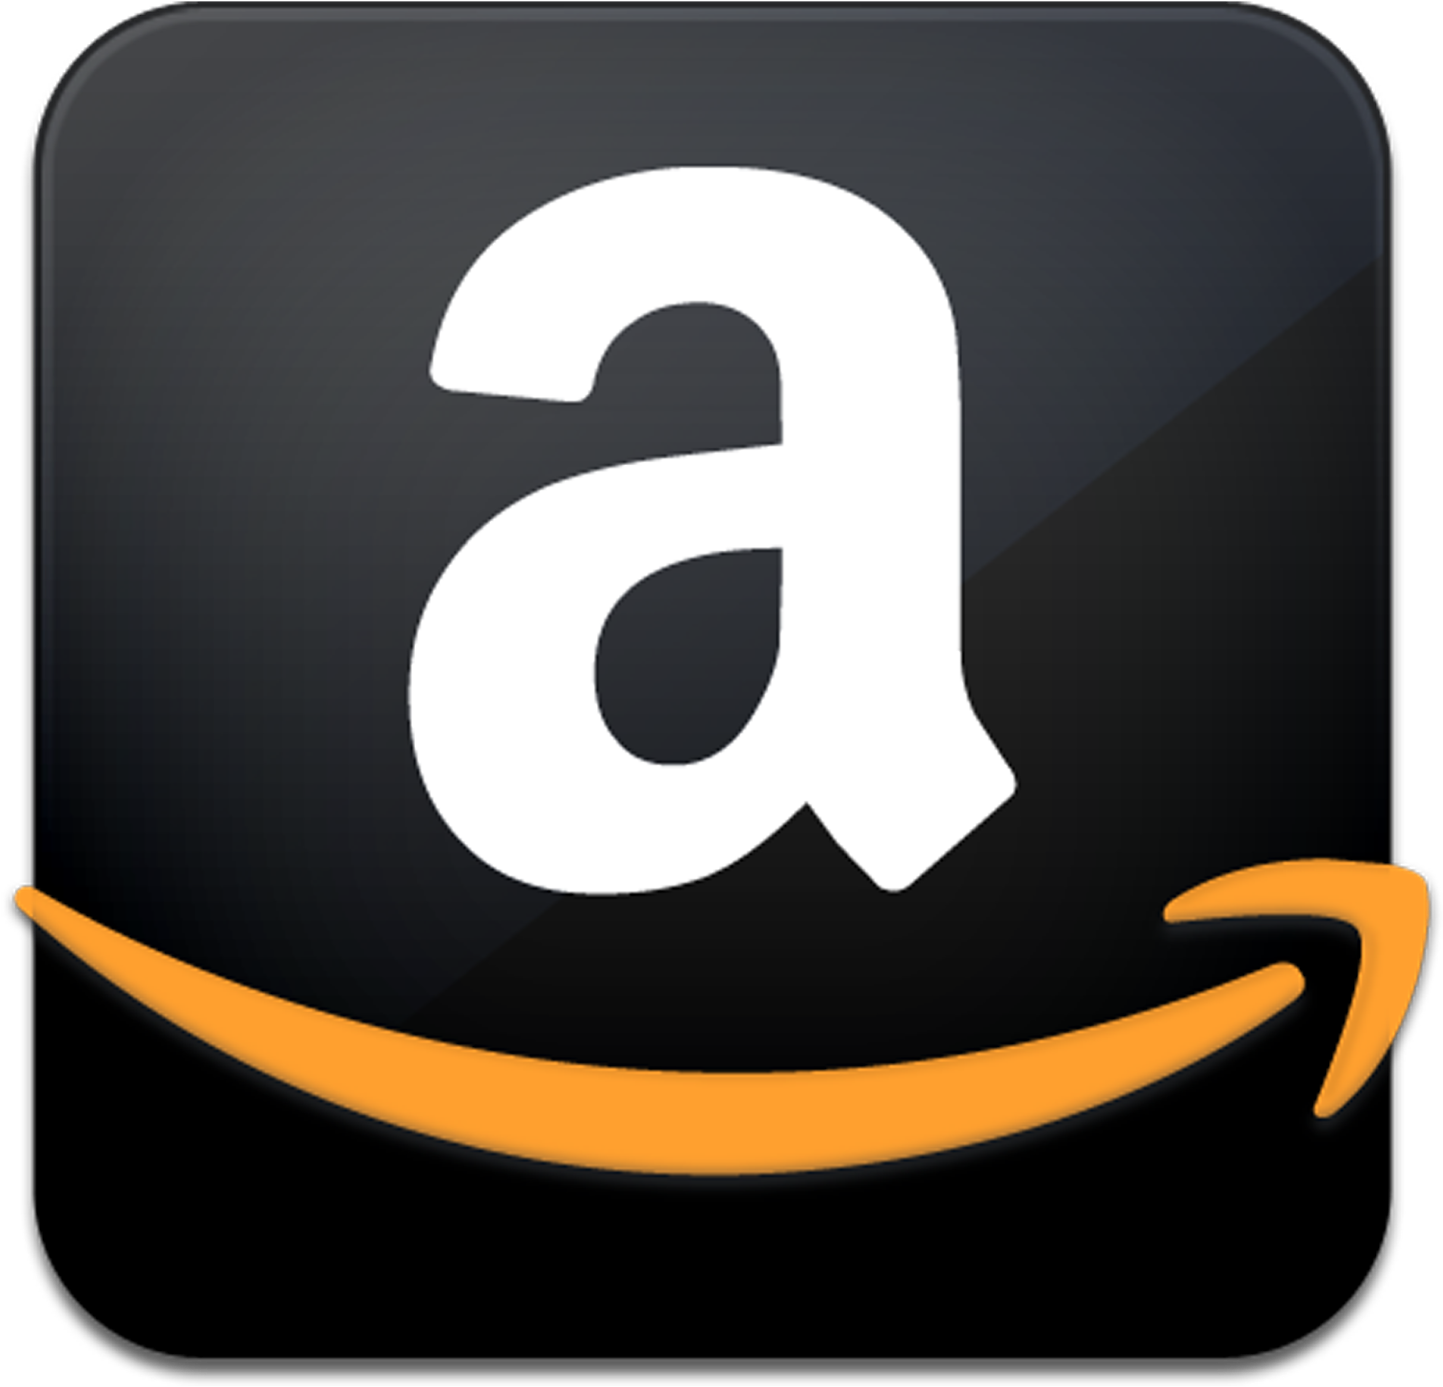 E-books Are Free To Upload To Places Like Amazon, Although - Logo Letter A With Orange Arrow (1600x1600)